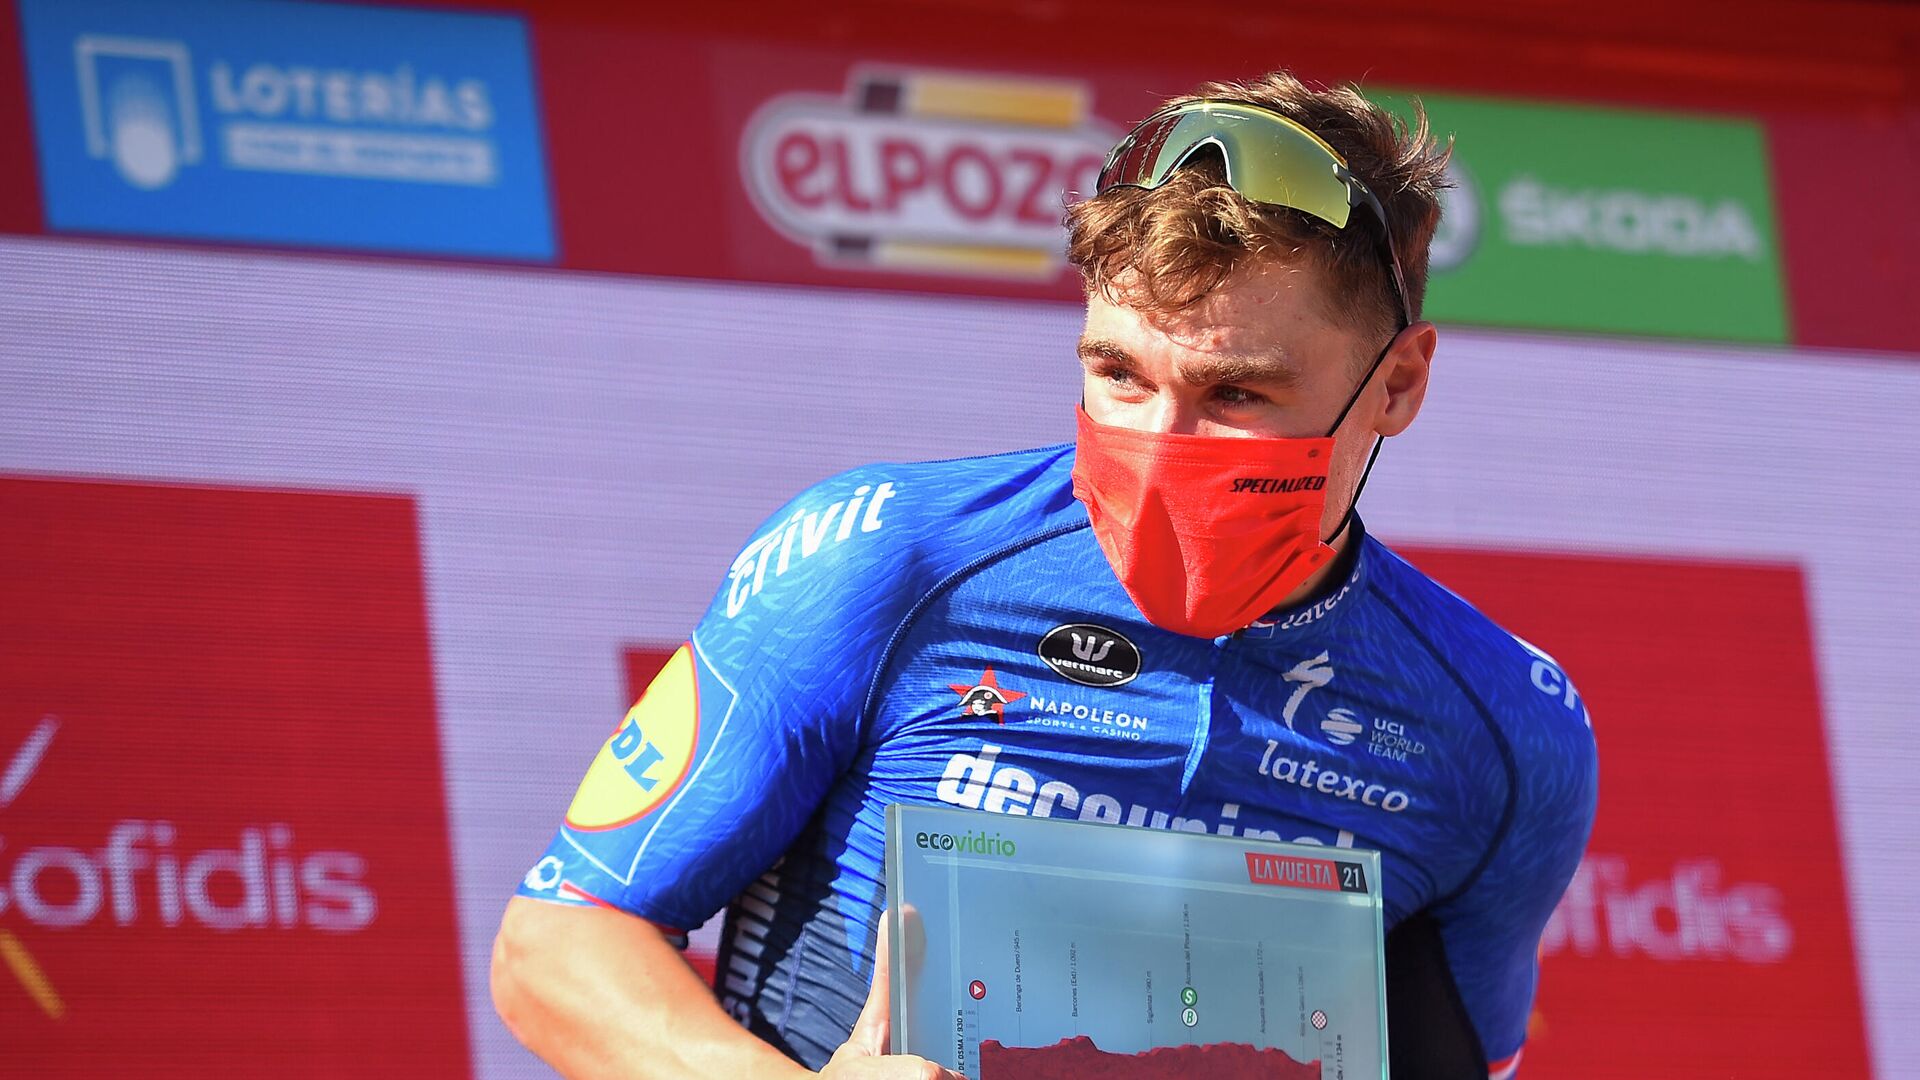 Stage winner team Deceuninck Quick Step's Dutch rider Fabio Jakobsen celebrates on the podium after winning the 4th stage of the 2021 La Vuelta cycling tour of Spain, a 163,9km race from El Burgo de Osma to Molina de Aragon, on August 17, 2021. (Photo by ANDER GILLENEA / AFP) - РИА Новости, 1920, 17.08.2021